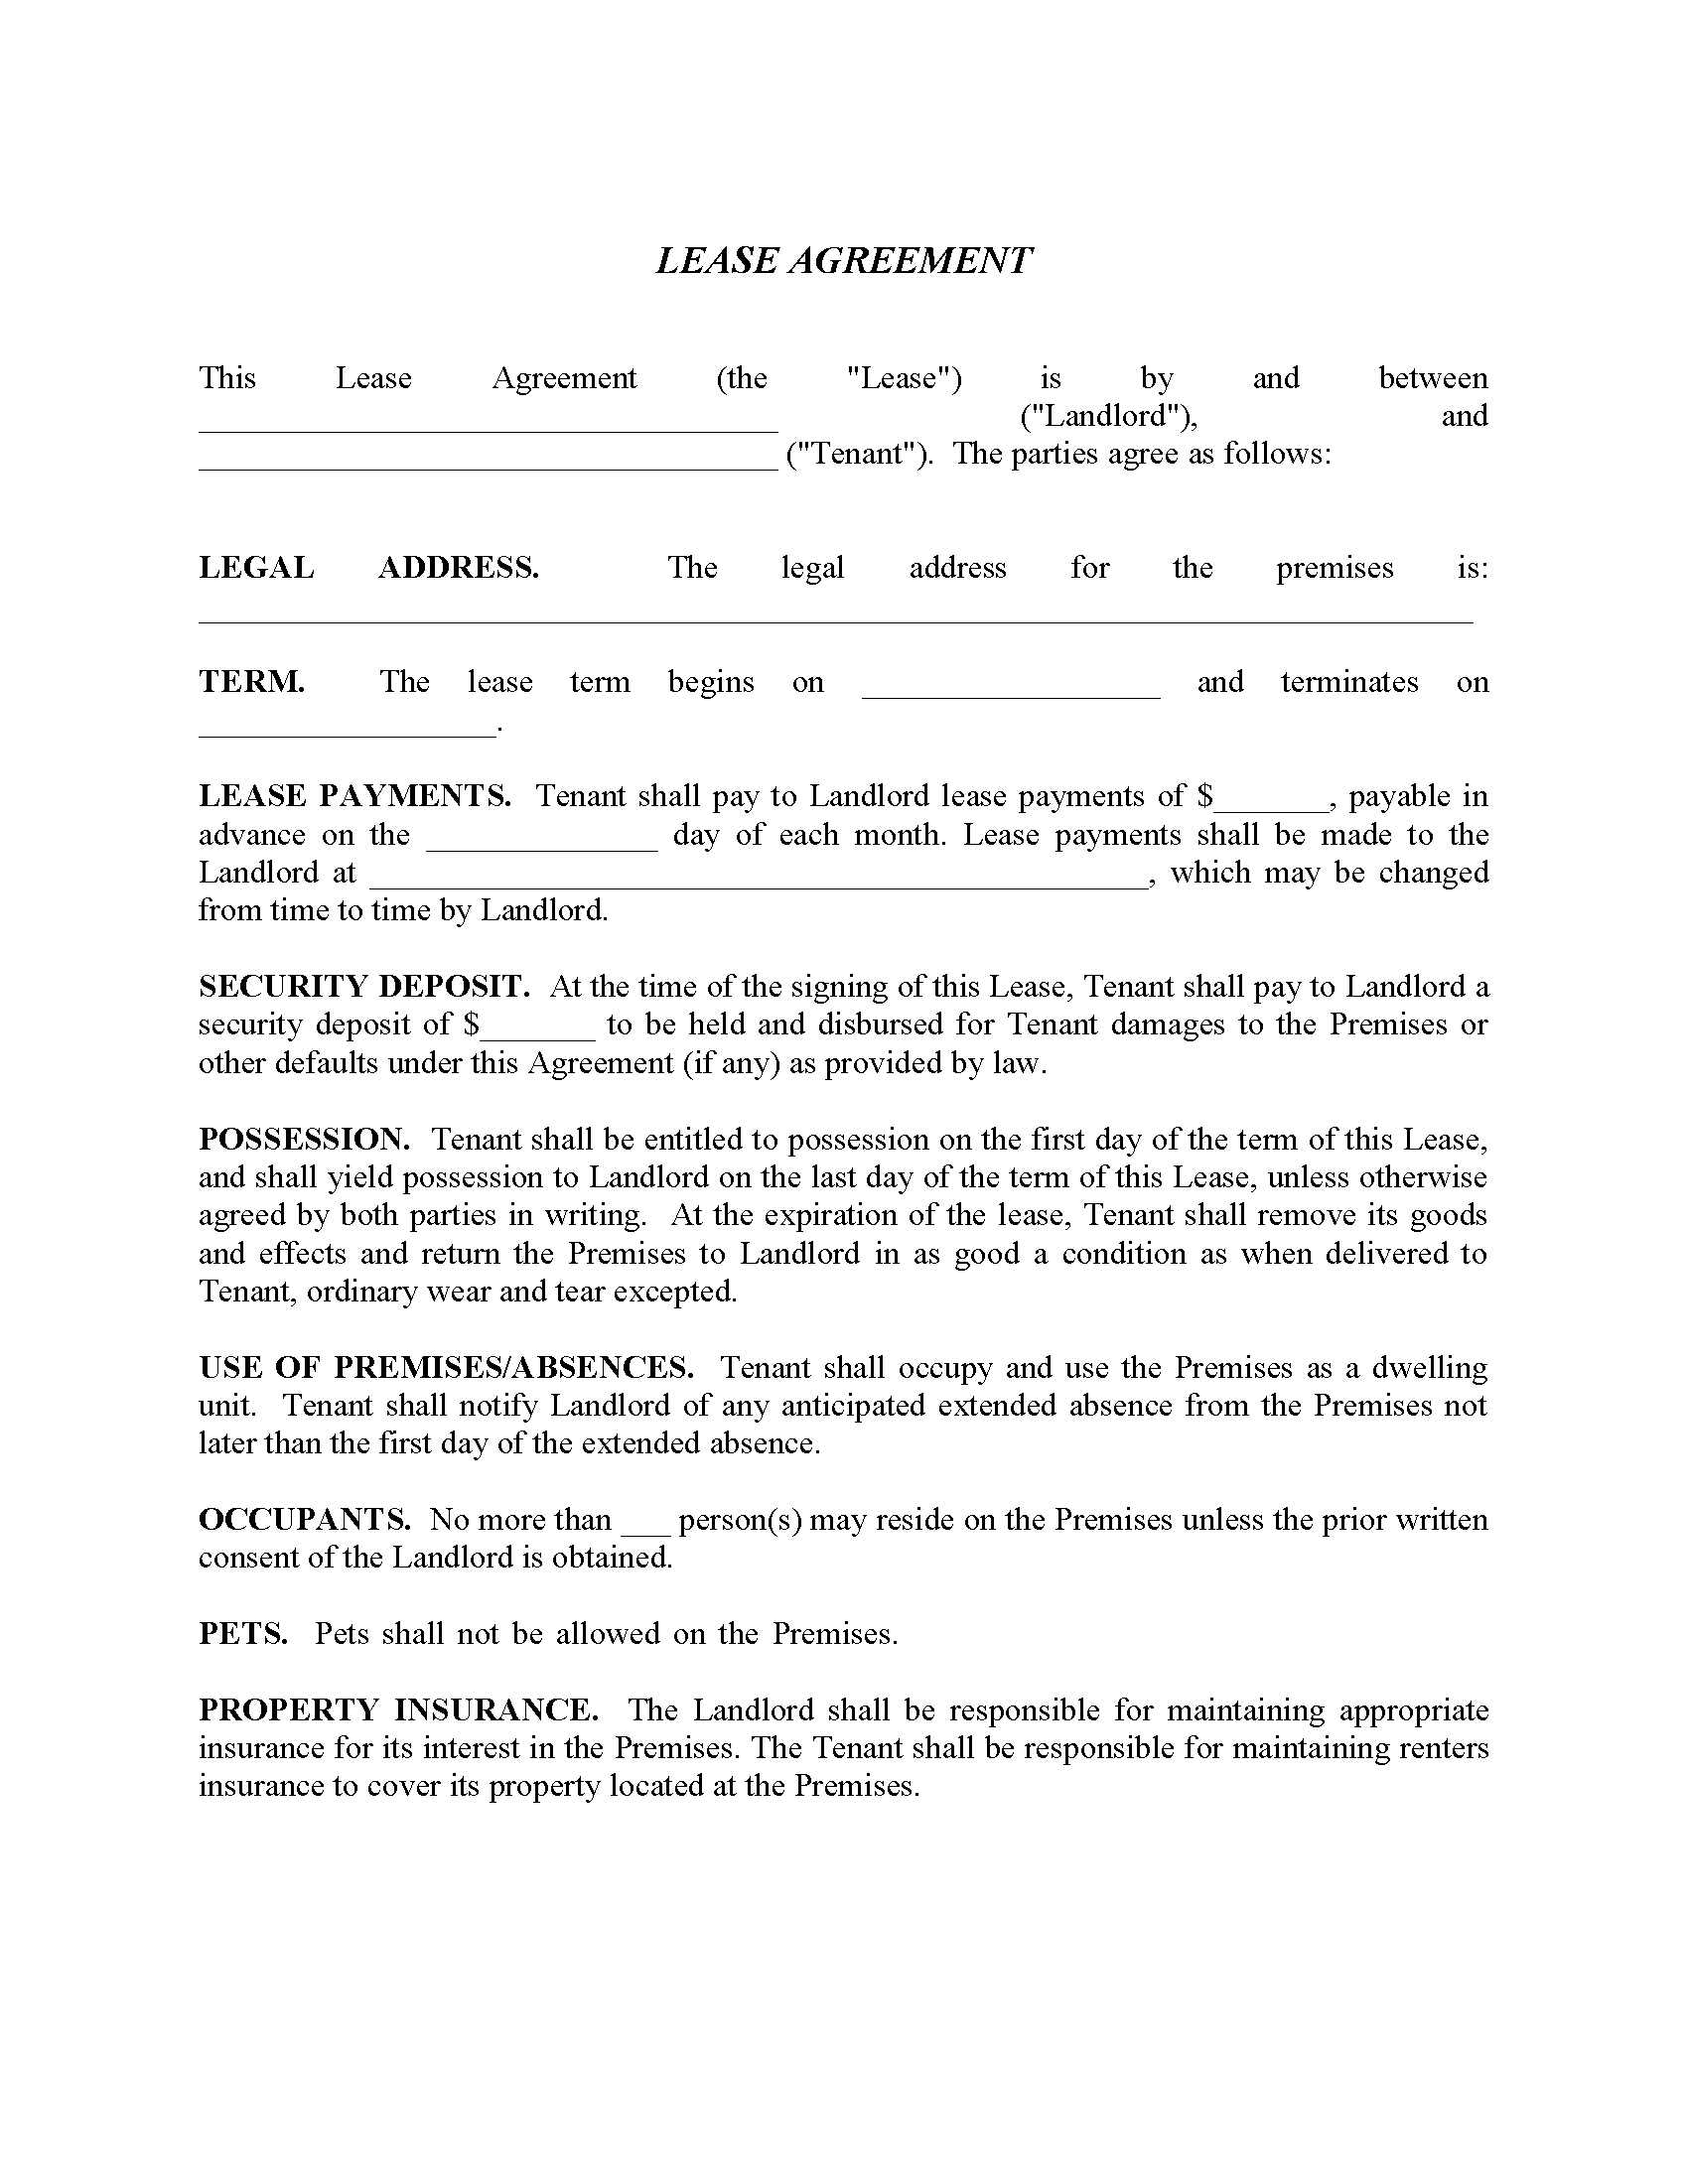 printable-lease-agreement-fill-online-printable-fillable-blank